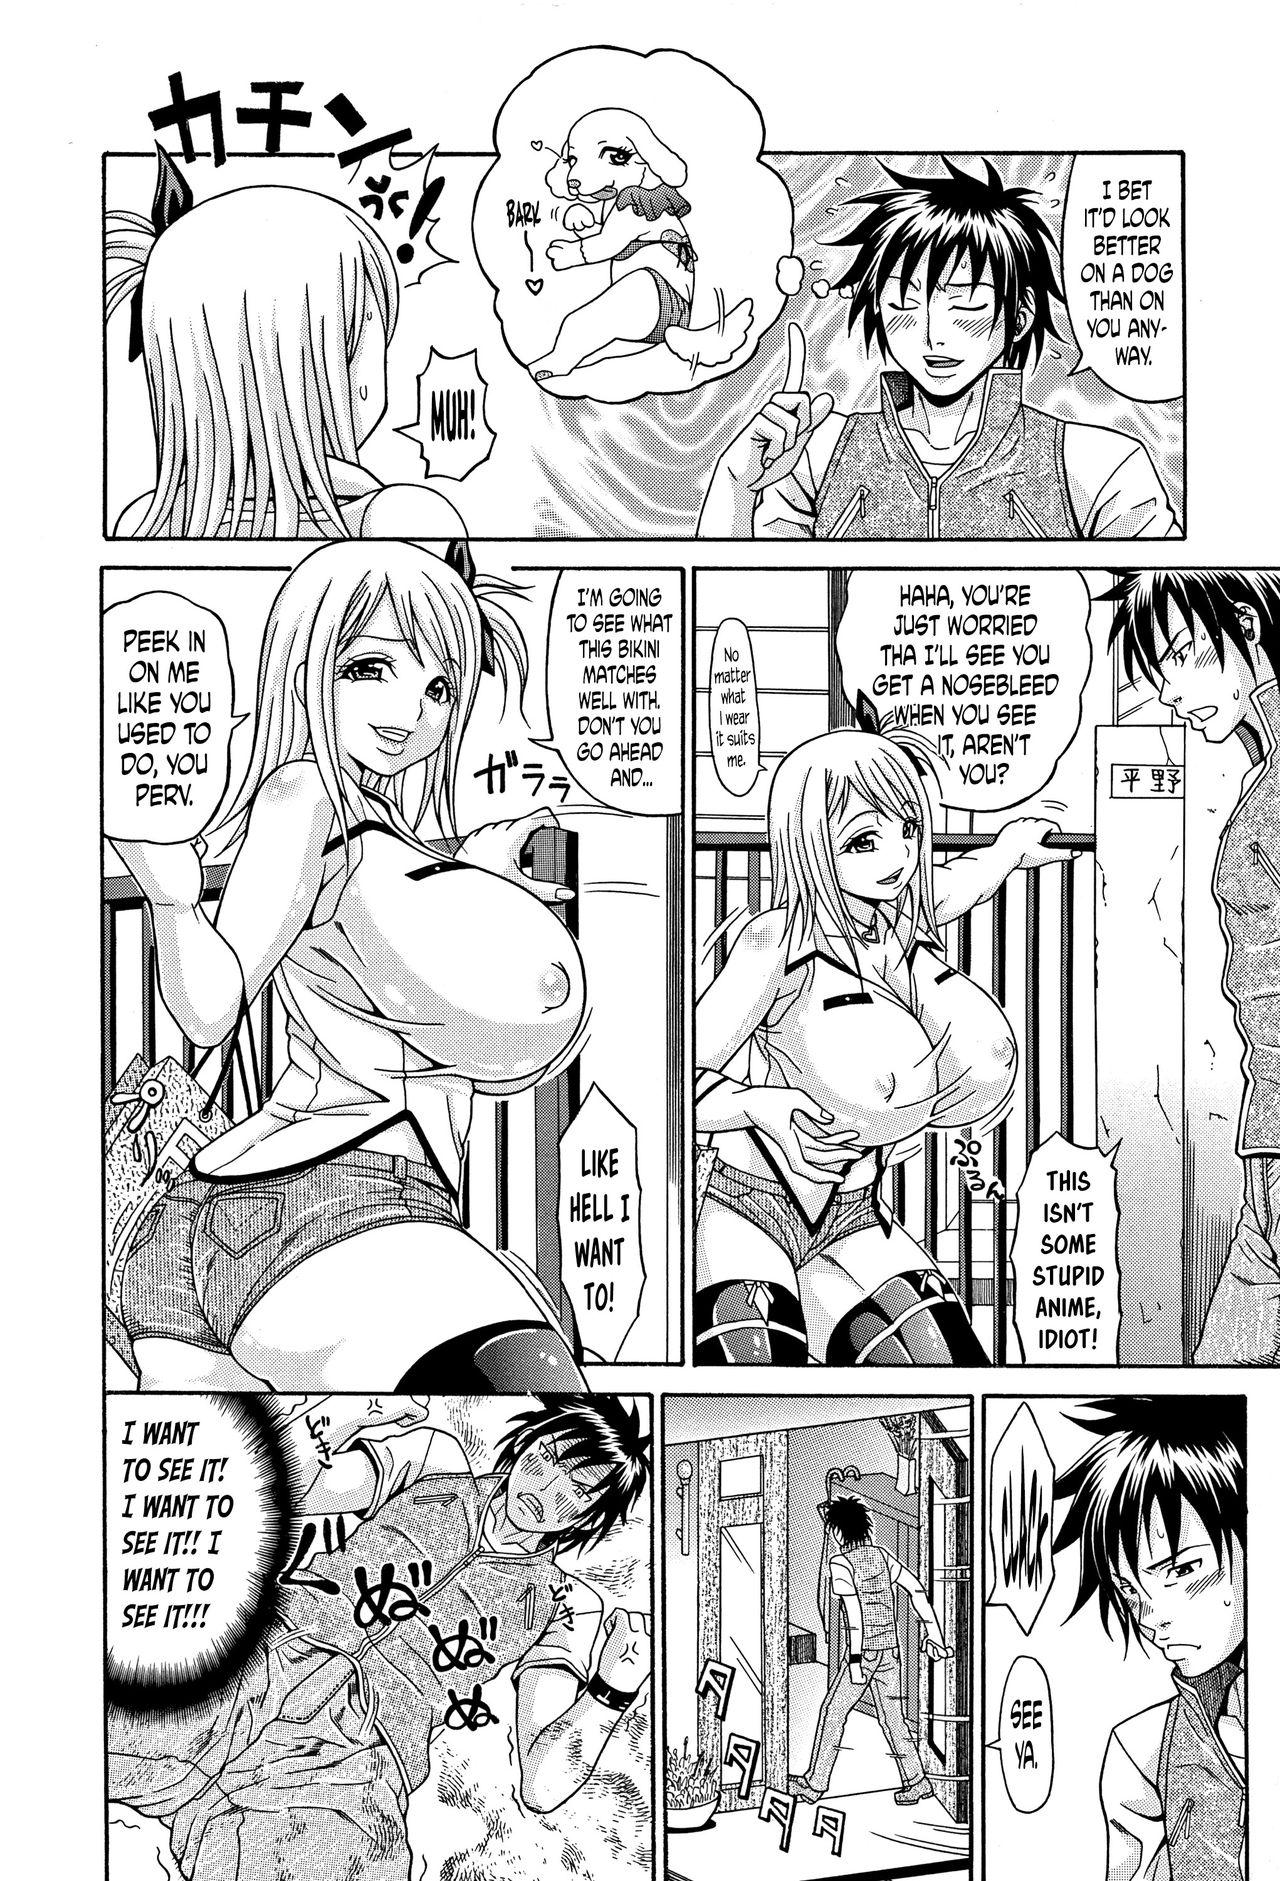 [Andou Hiroyuki] Mamire Chichi - Sticky Tits Feel Hot All Over. Ch.1-6 [English] [doujin-moe.us] 38